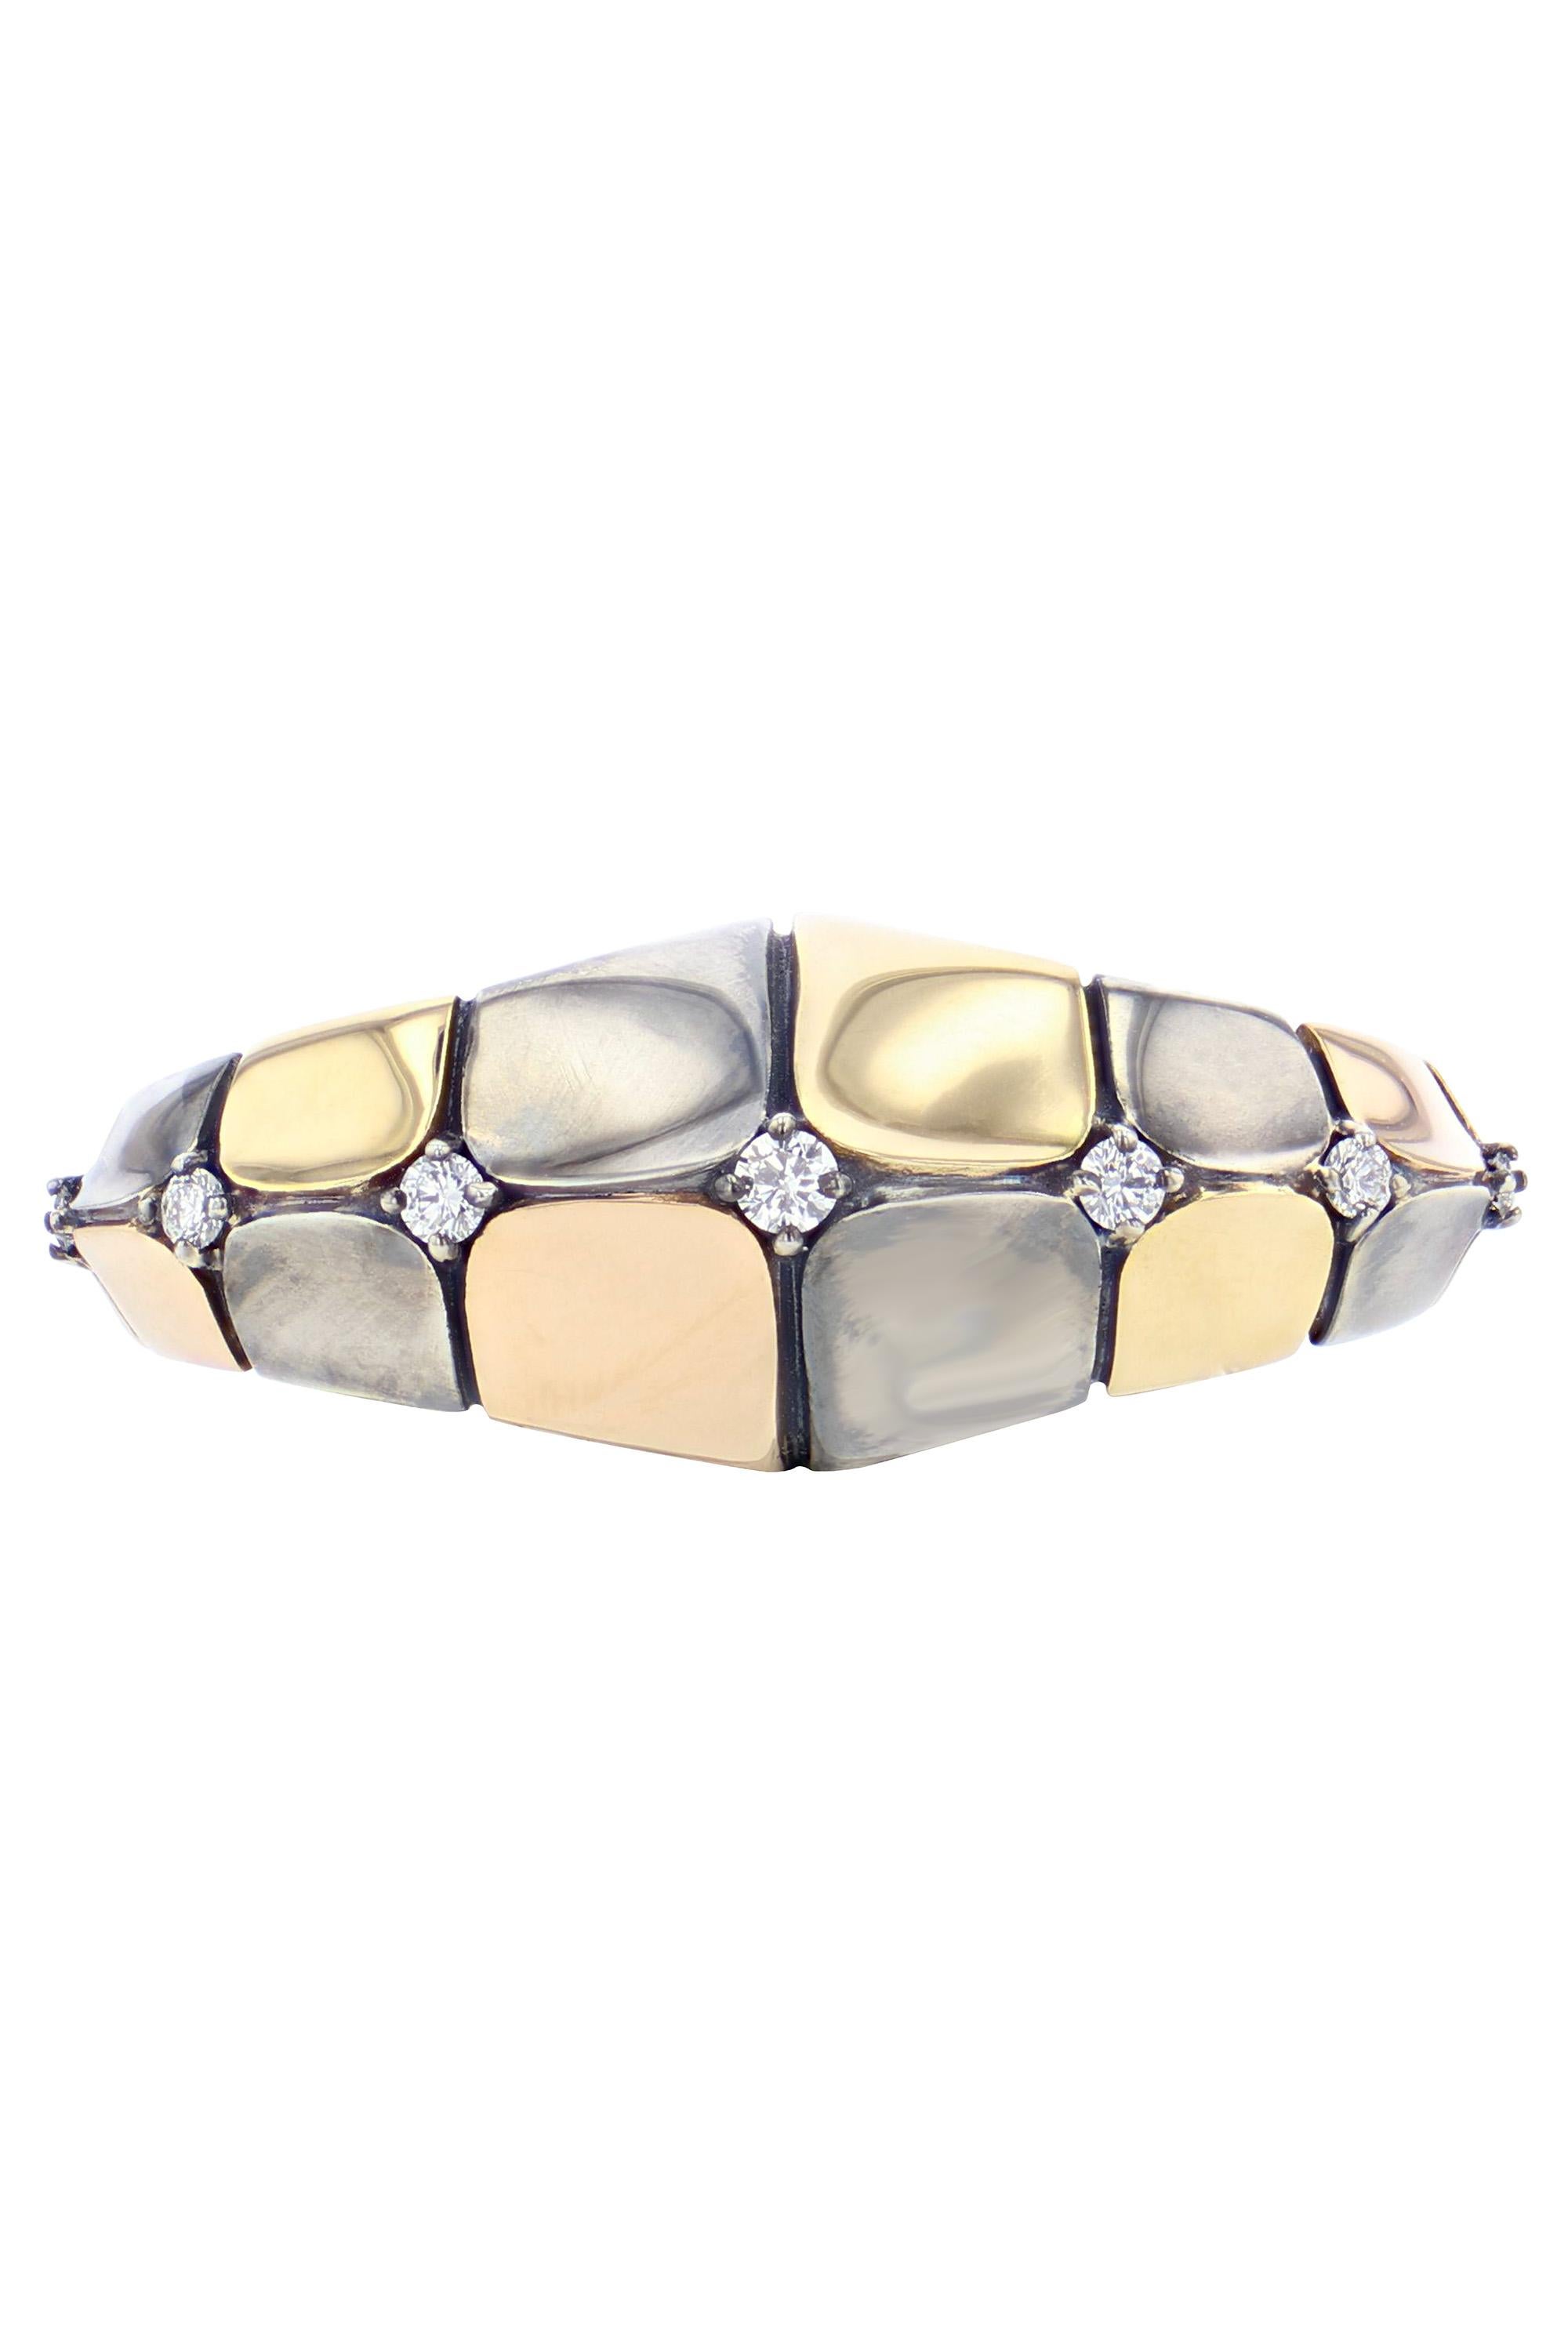 Yellow gold and distressed silver ring with yellow gold, rose gold or distressed silver scales, set with diamonds.

Details:
9 Diamonds: 0.34 cts
18k Yellow Gold & Rose Gold: 7.5 g
Distressed Silver: 7 g
Made in France